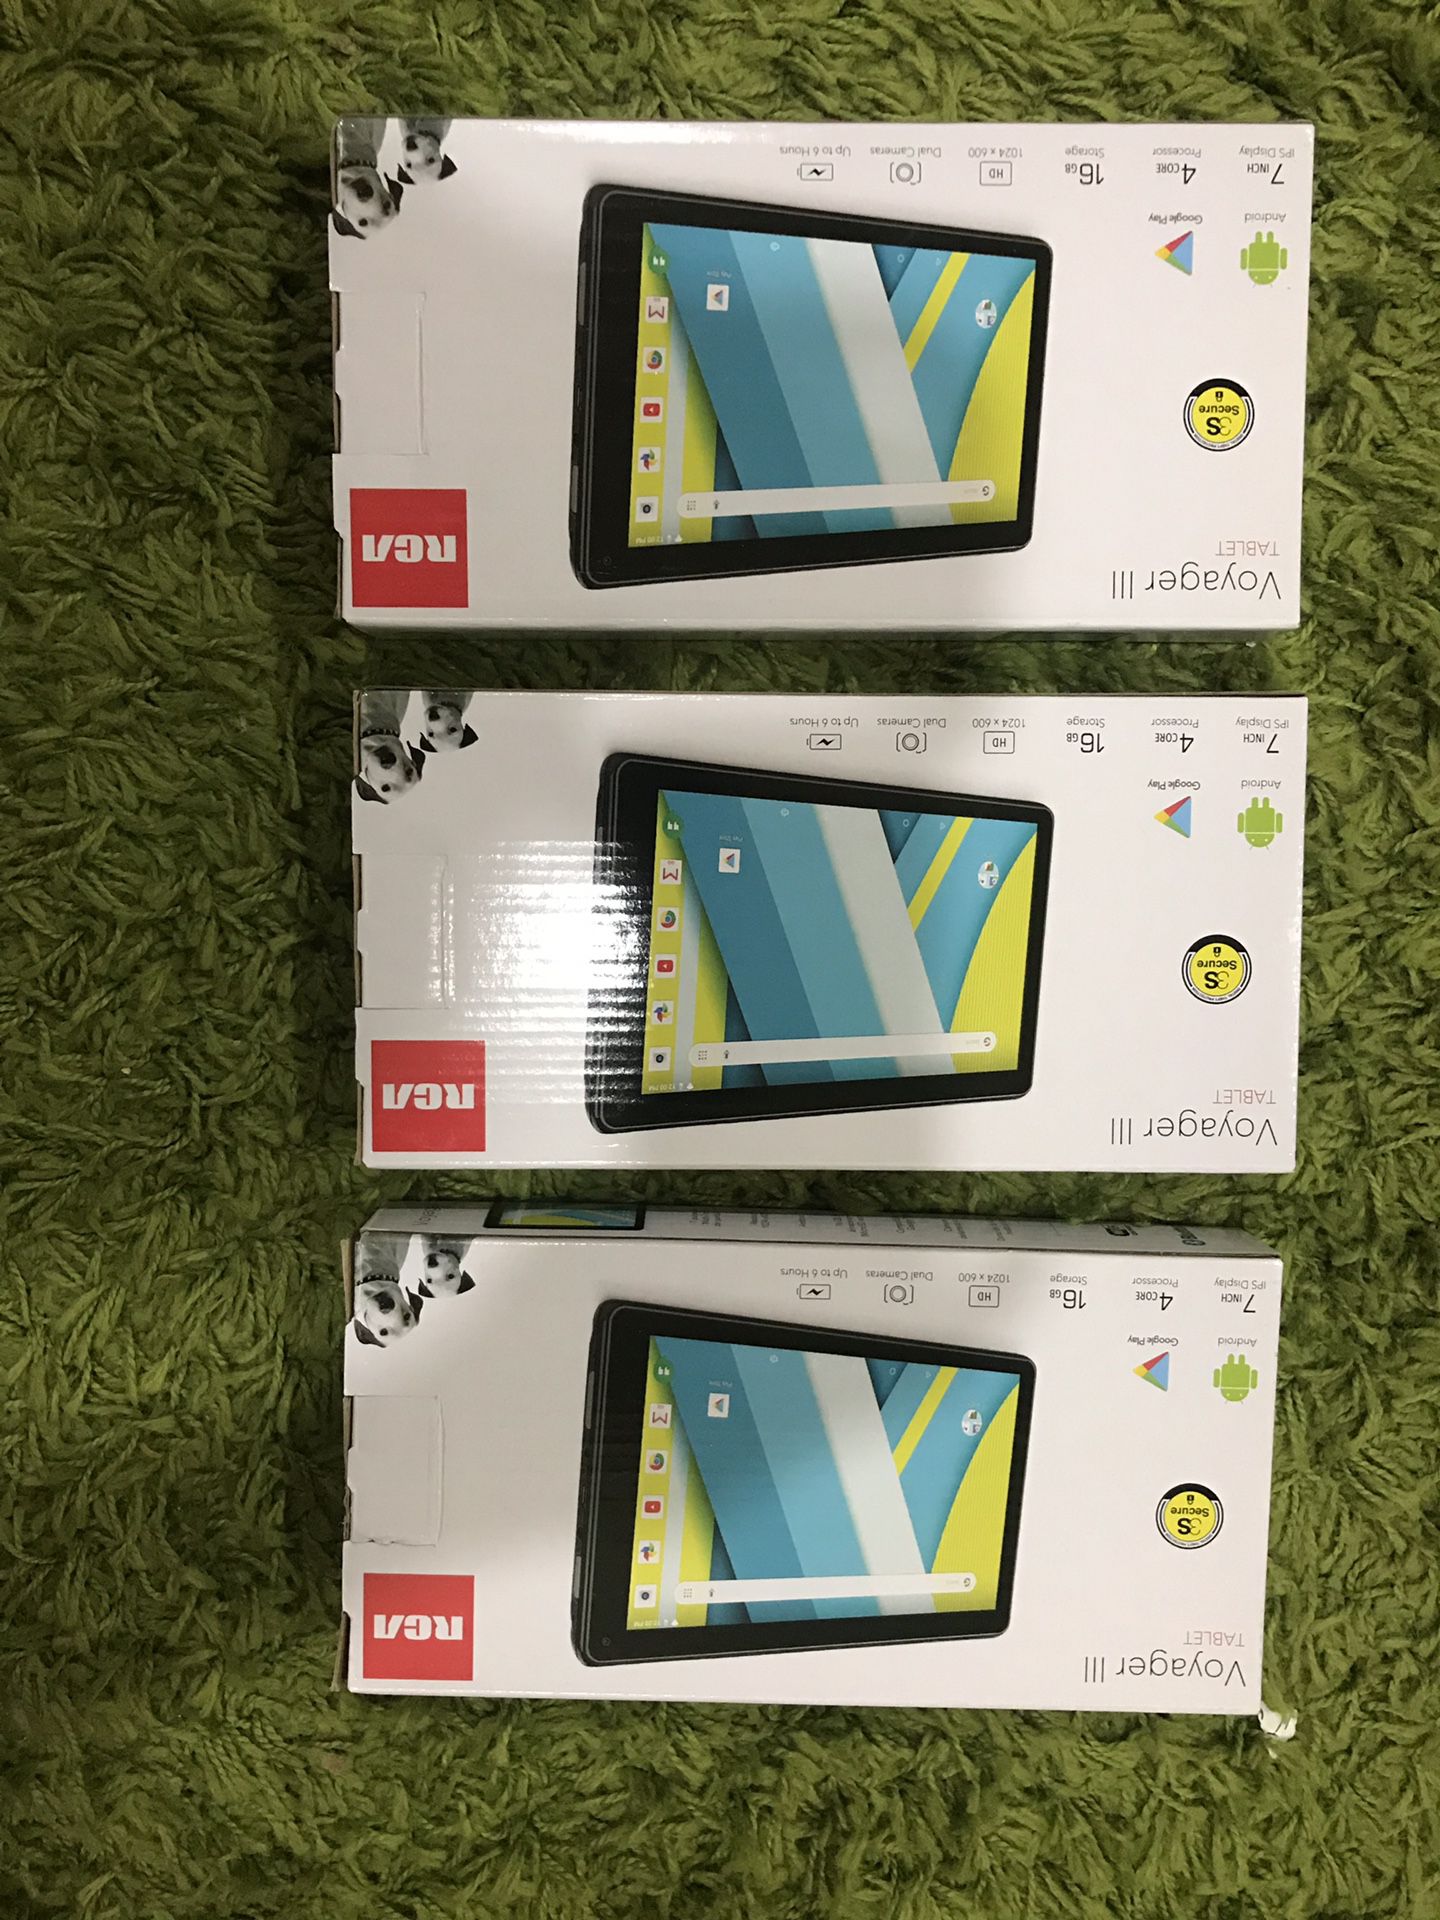 RCA 7” Quad core Android Tablet - 16GB - 3 Tablets